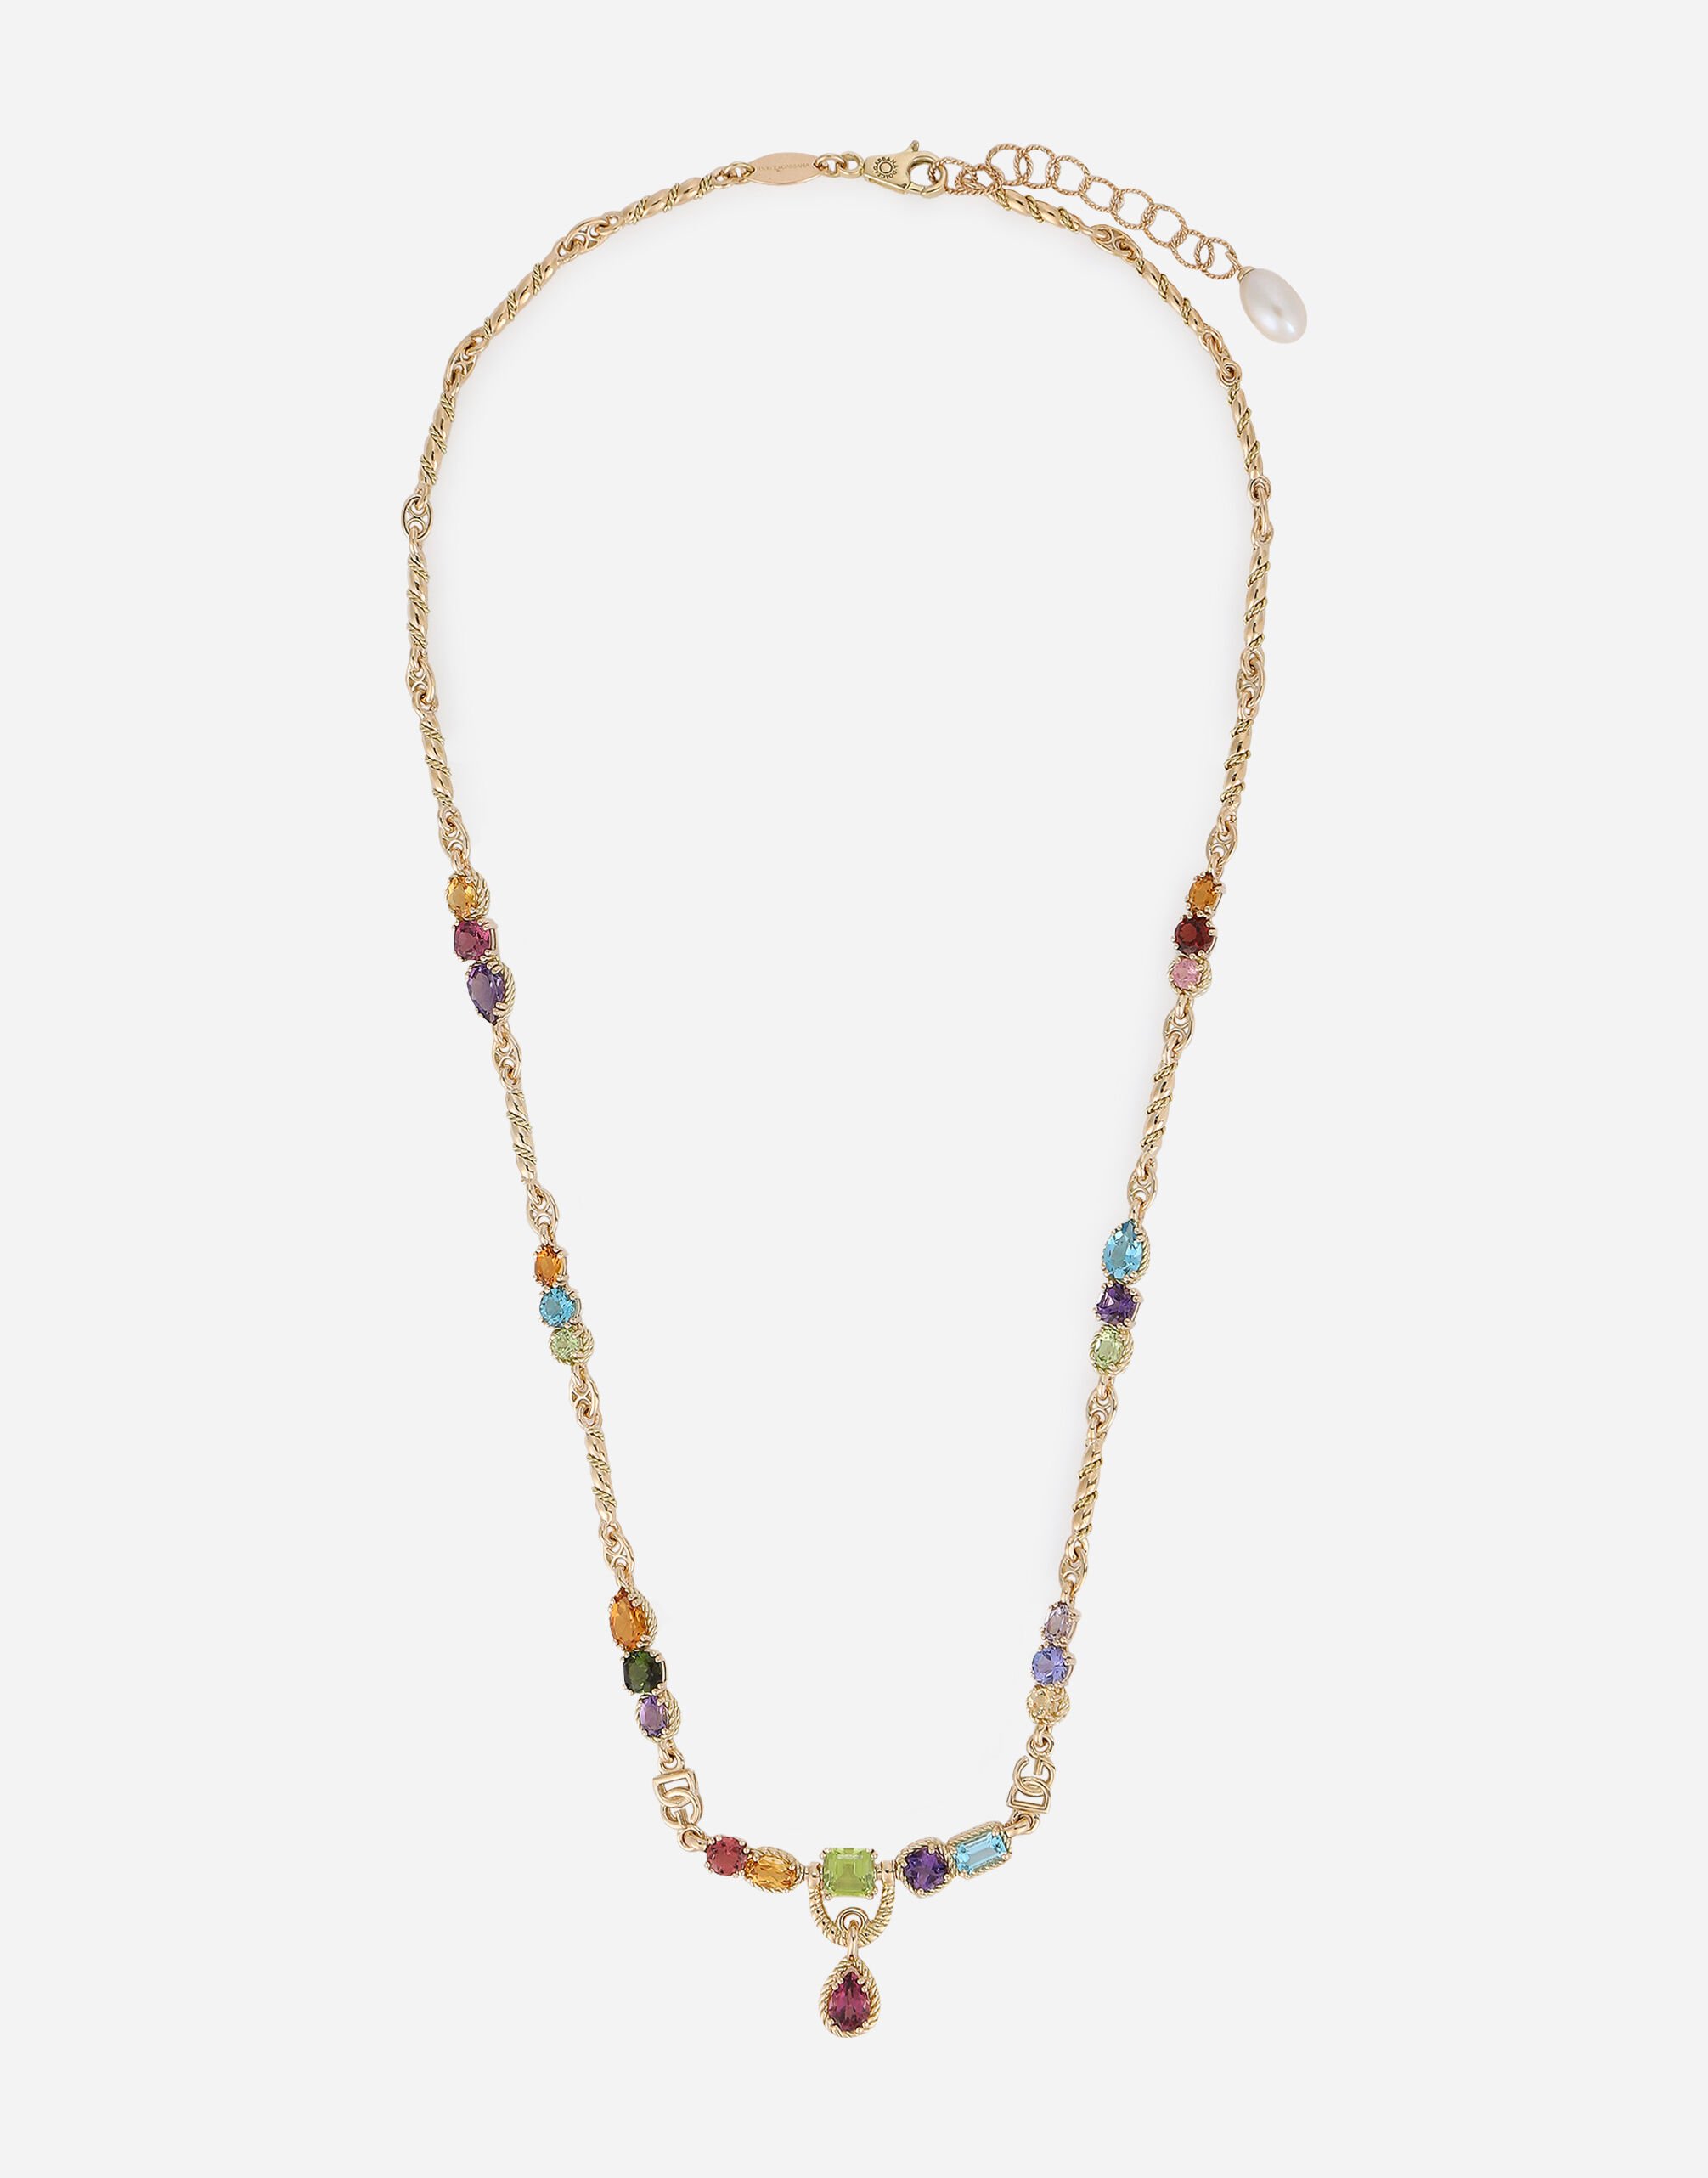 ${brand} 18kt yellow gold necklace with multicolored fine gemstones ${colorDescription} ${masterID}